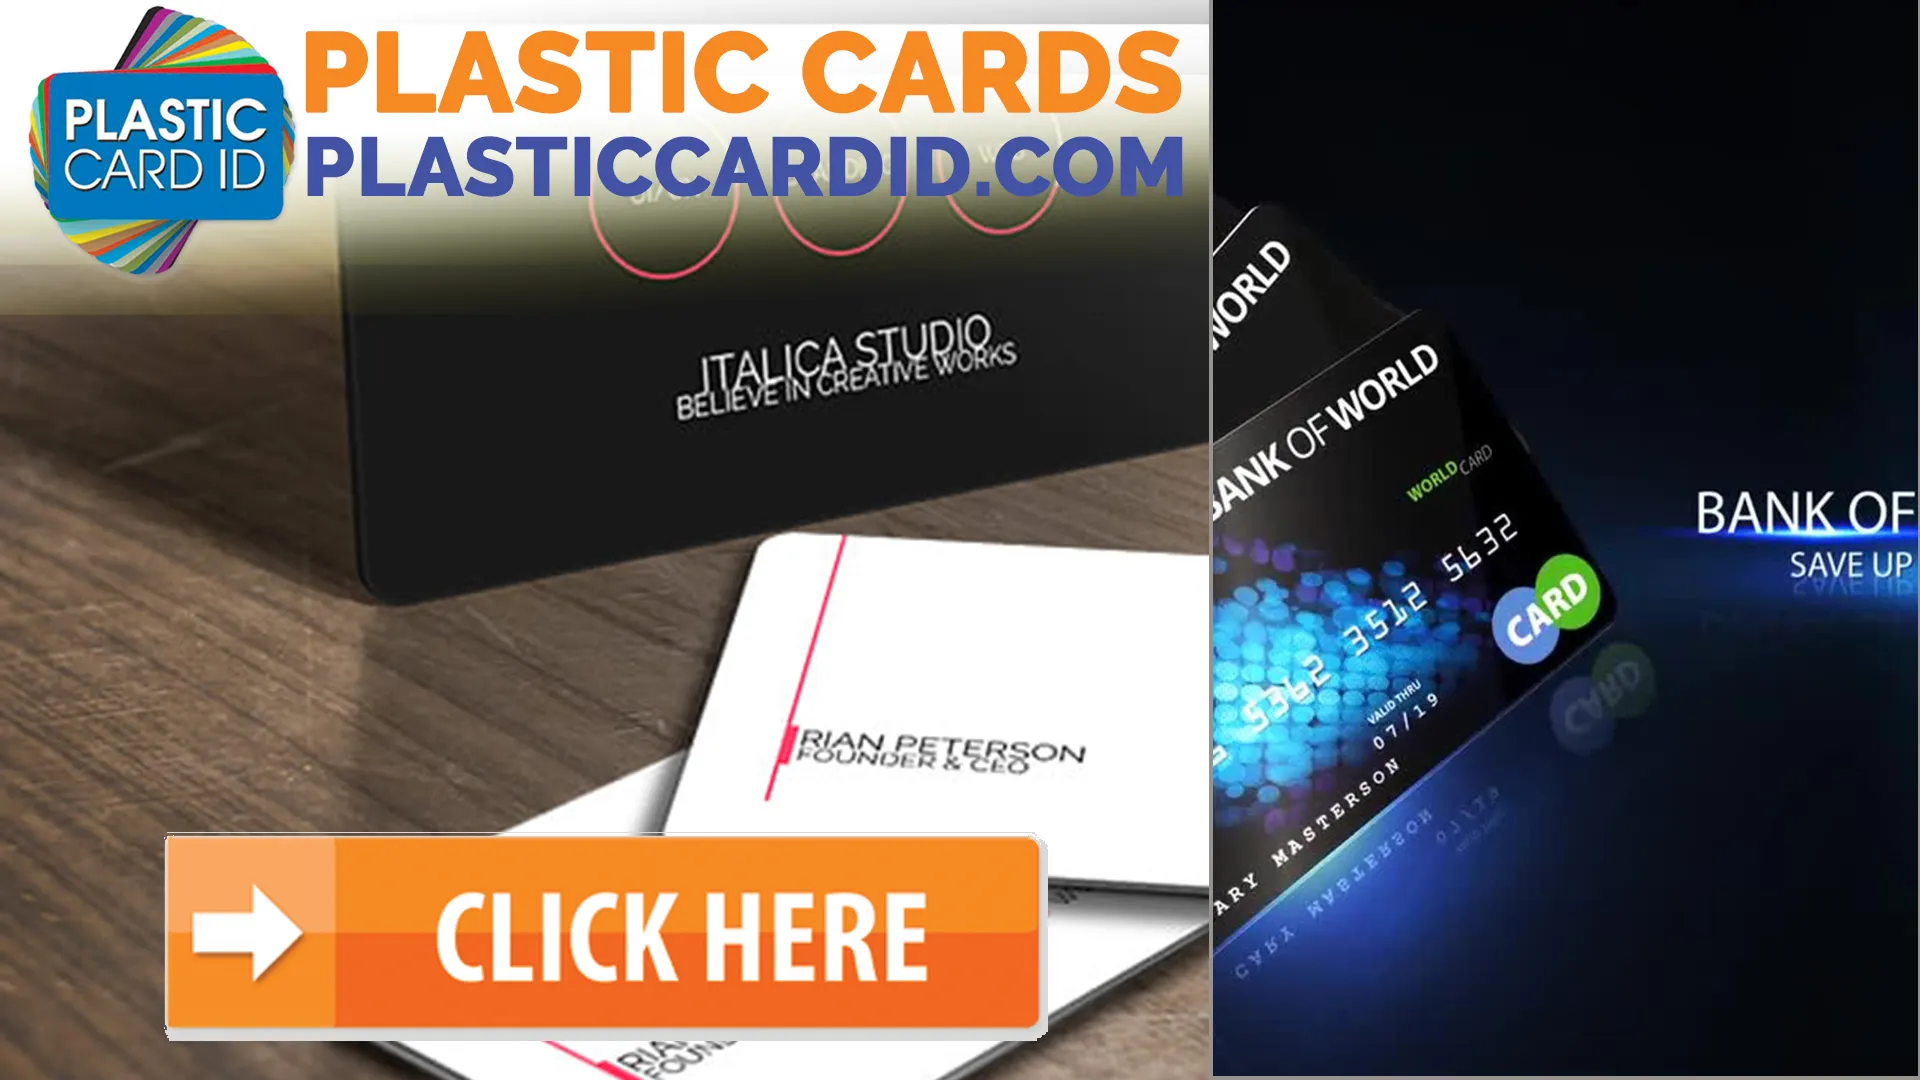 Welcome to Our World of Plastic Cards